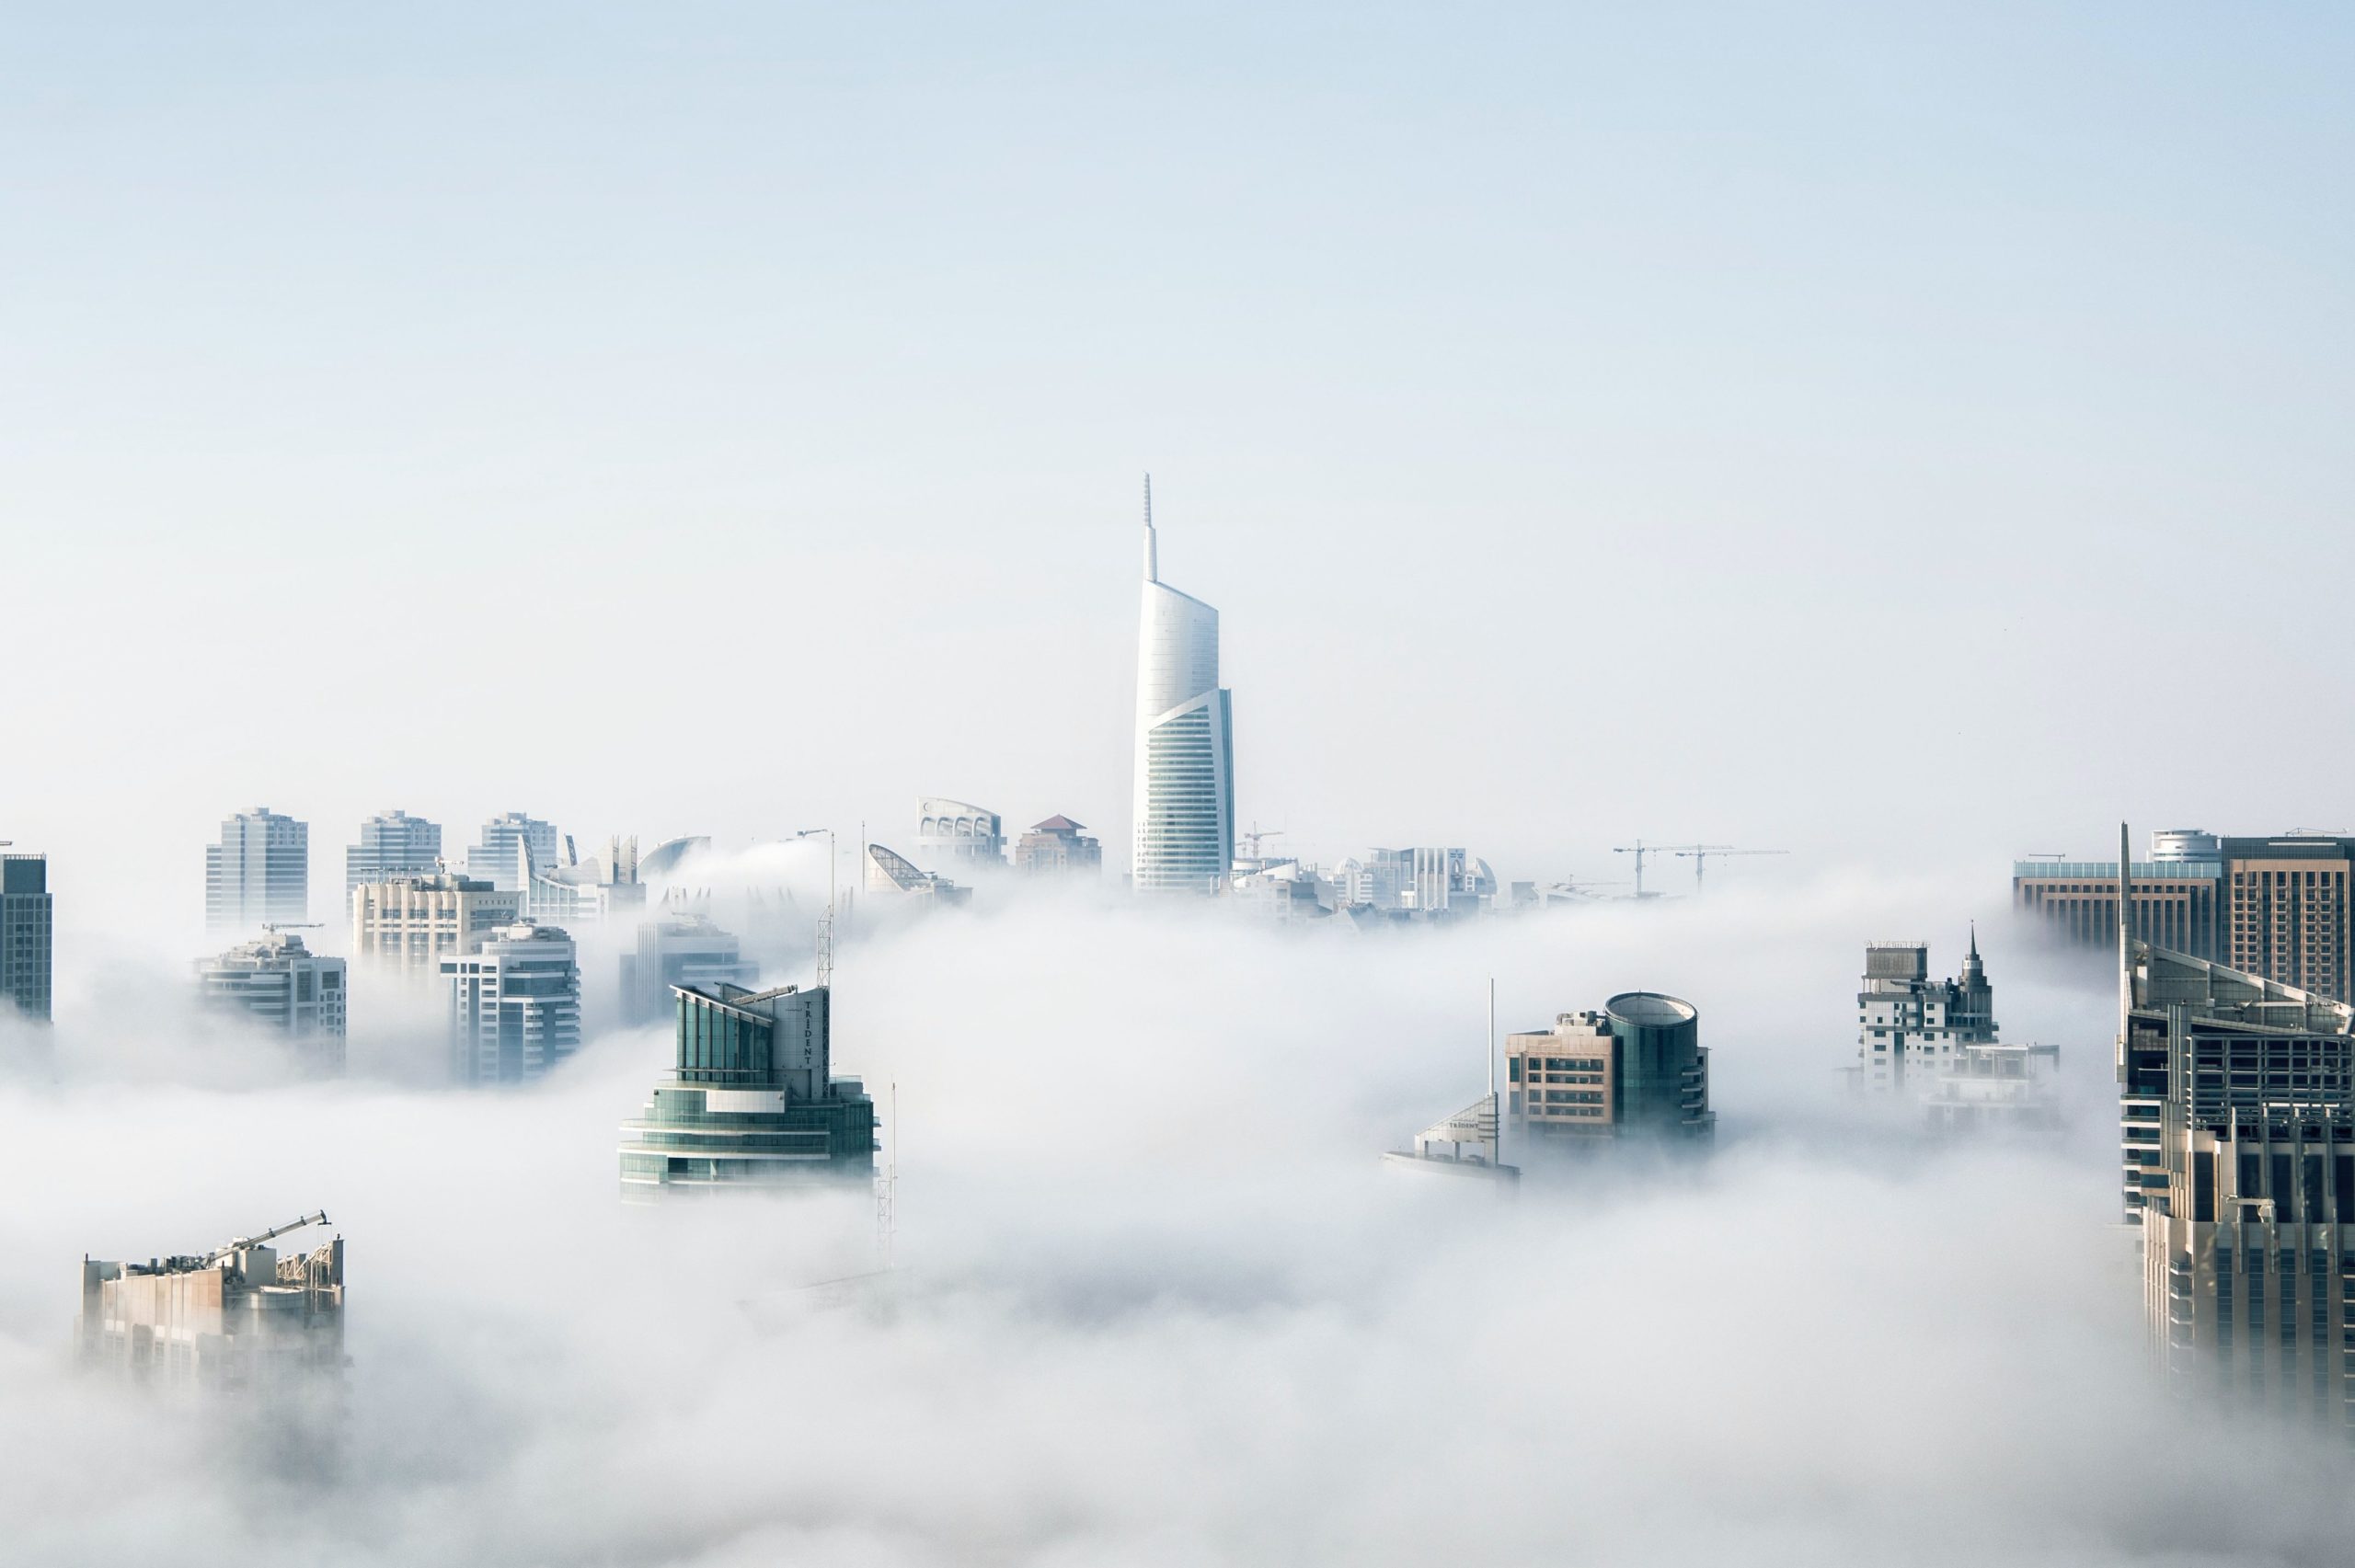 A picture of city covered by clouds not unlike a network which must protect itself from malicious weather. In this article we look at the difference between DMZ networks and zero trust networks, how they relate, and whether DMZ networks are enough to meet modern network threats.